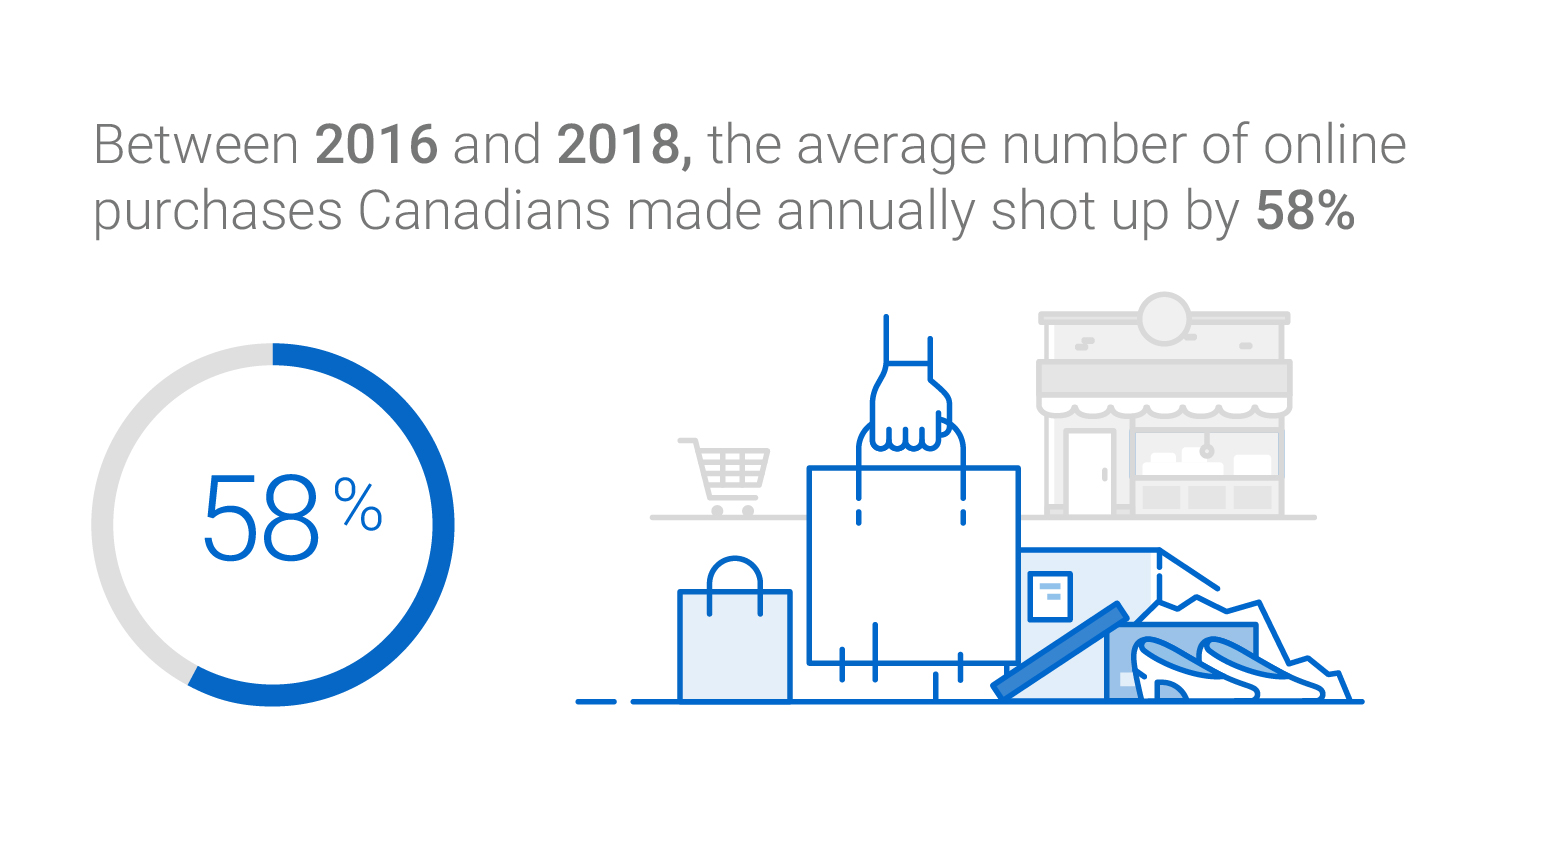 The average number of annual online purchases Canadians made went up by 58% between 2016 and 2018.